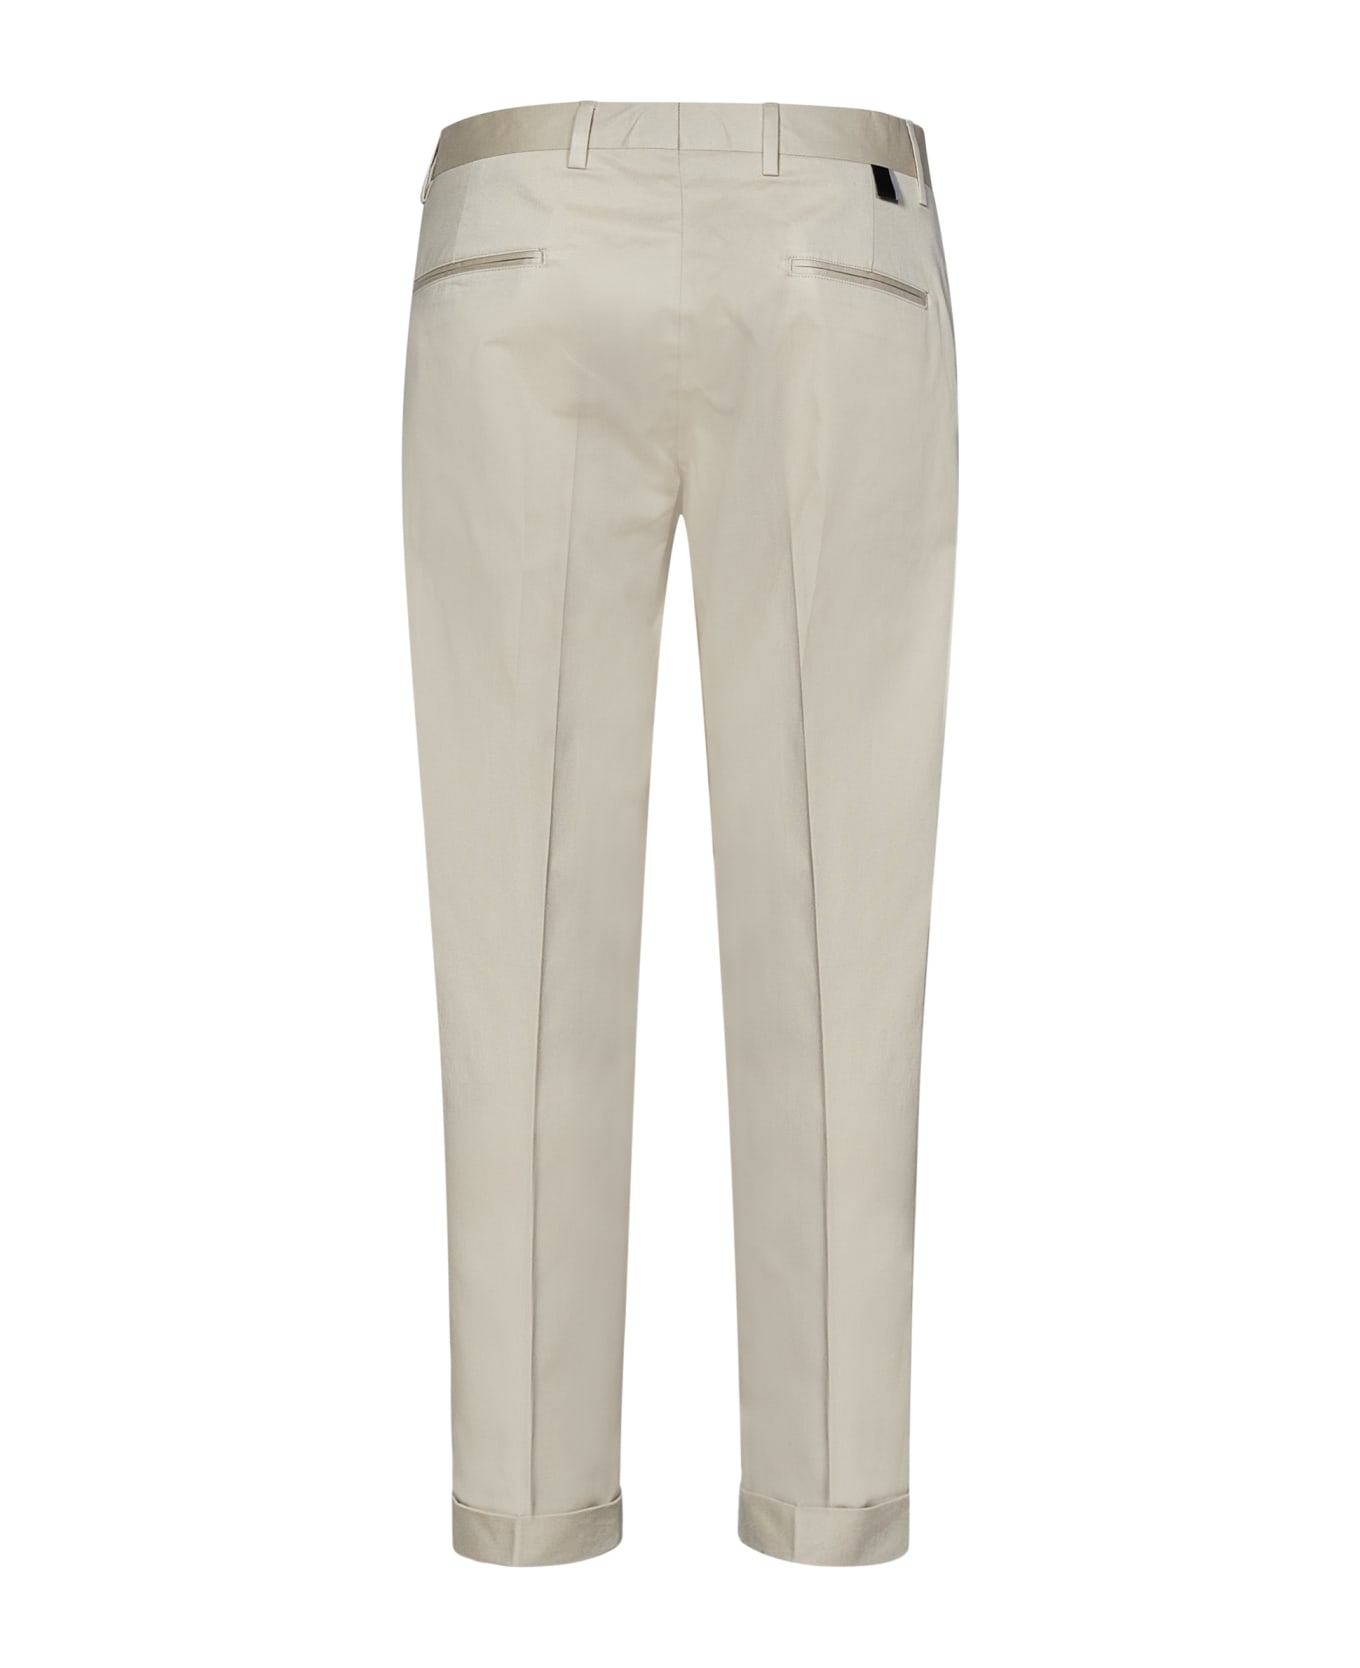 Low Brand Cooper T1.7 Trousers - Beige